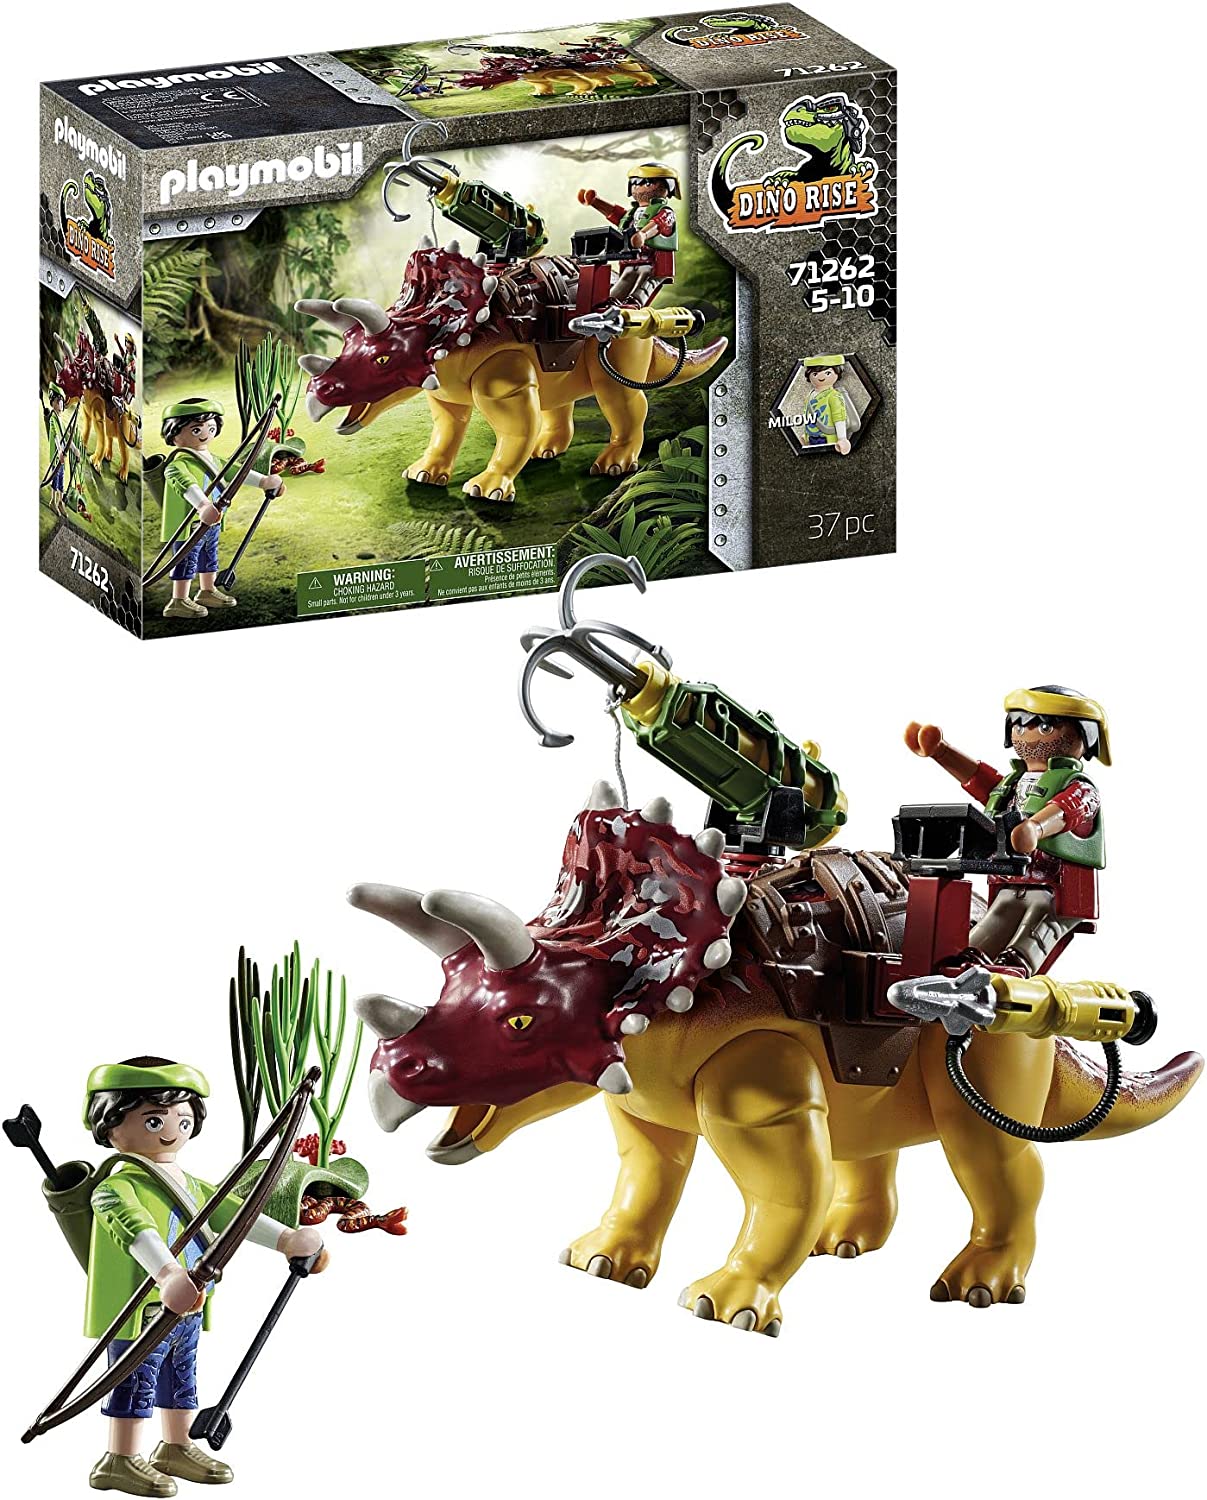 PLAYMOBIL Dino Rise 71262 Triceratops, Dinosaur with Removable Armor and Large Movable Cannon, Toy for Children from 5 Years